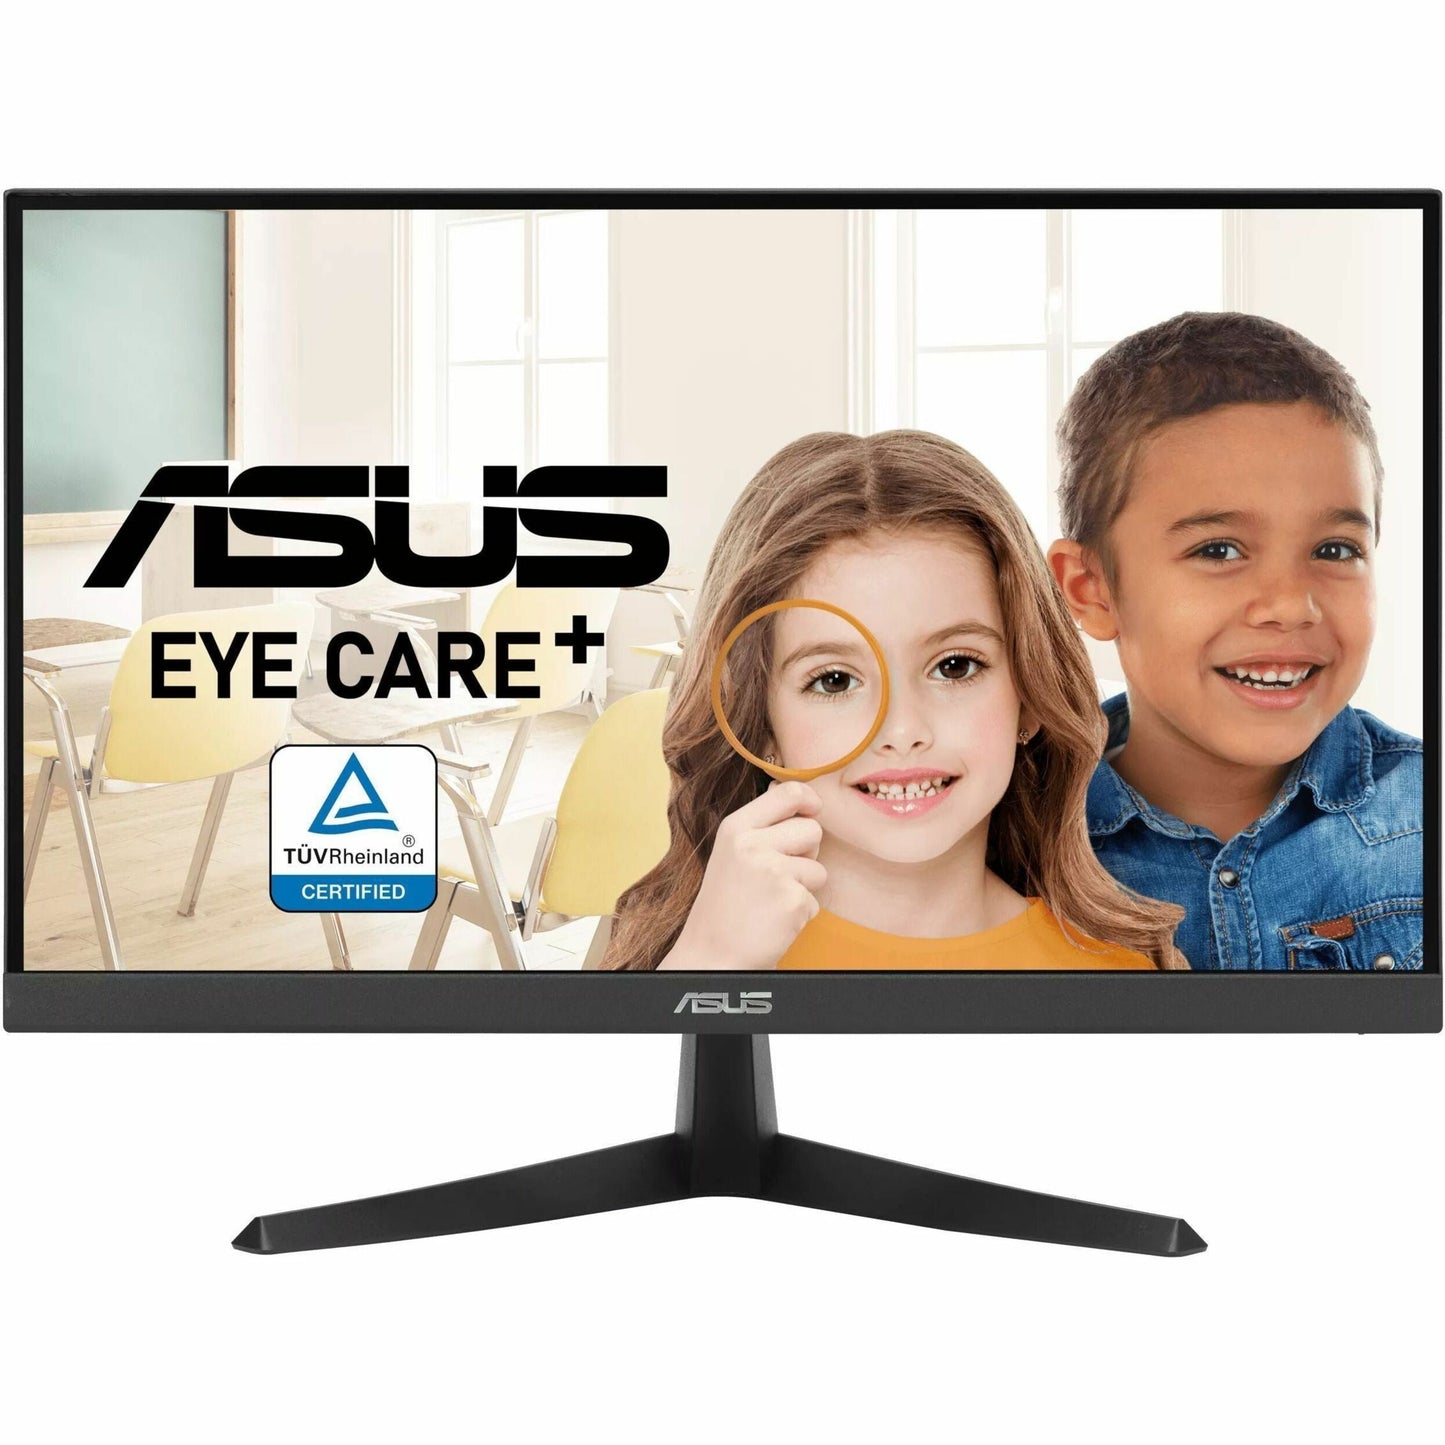 Asus VY229HE Full HD LED Monitor - 16:9